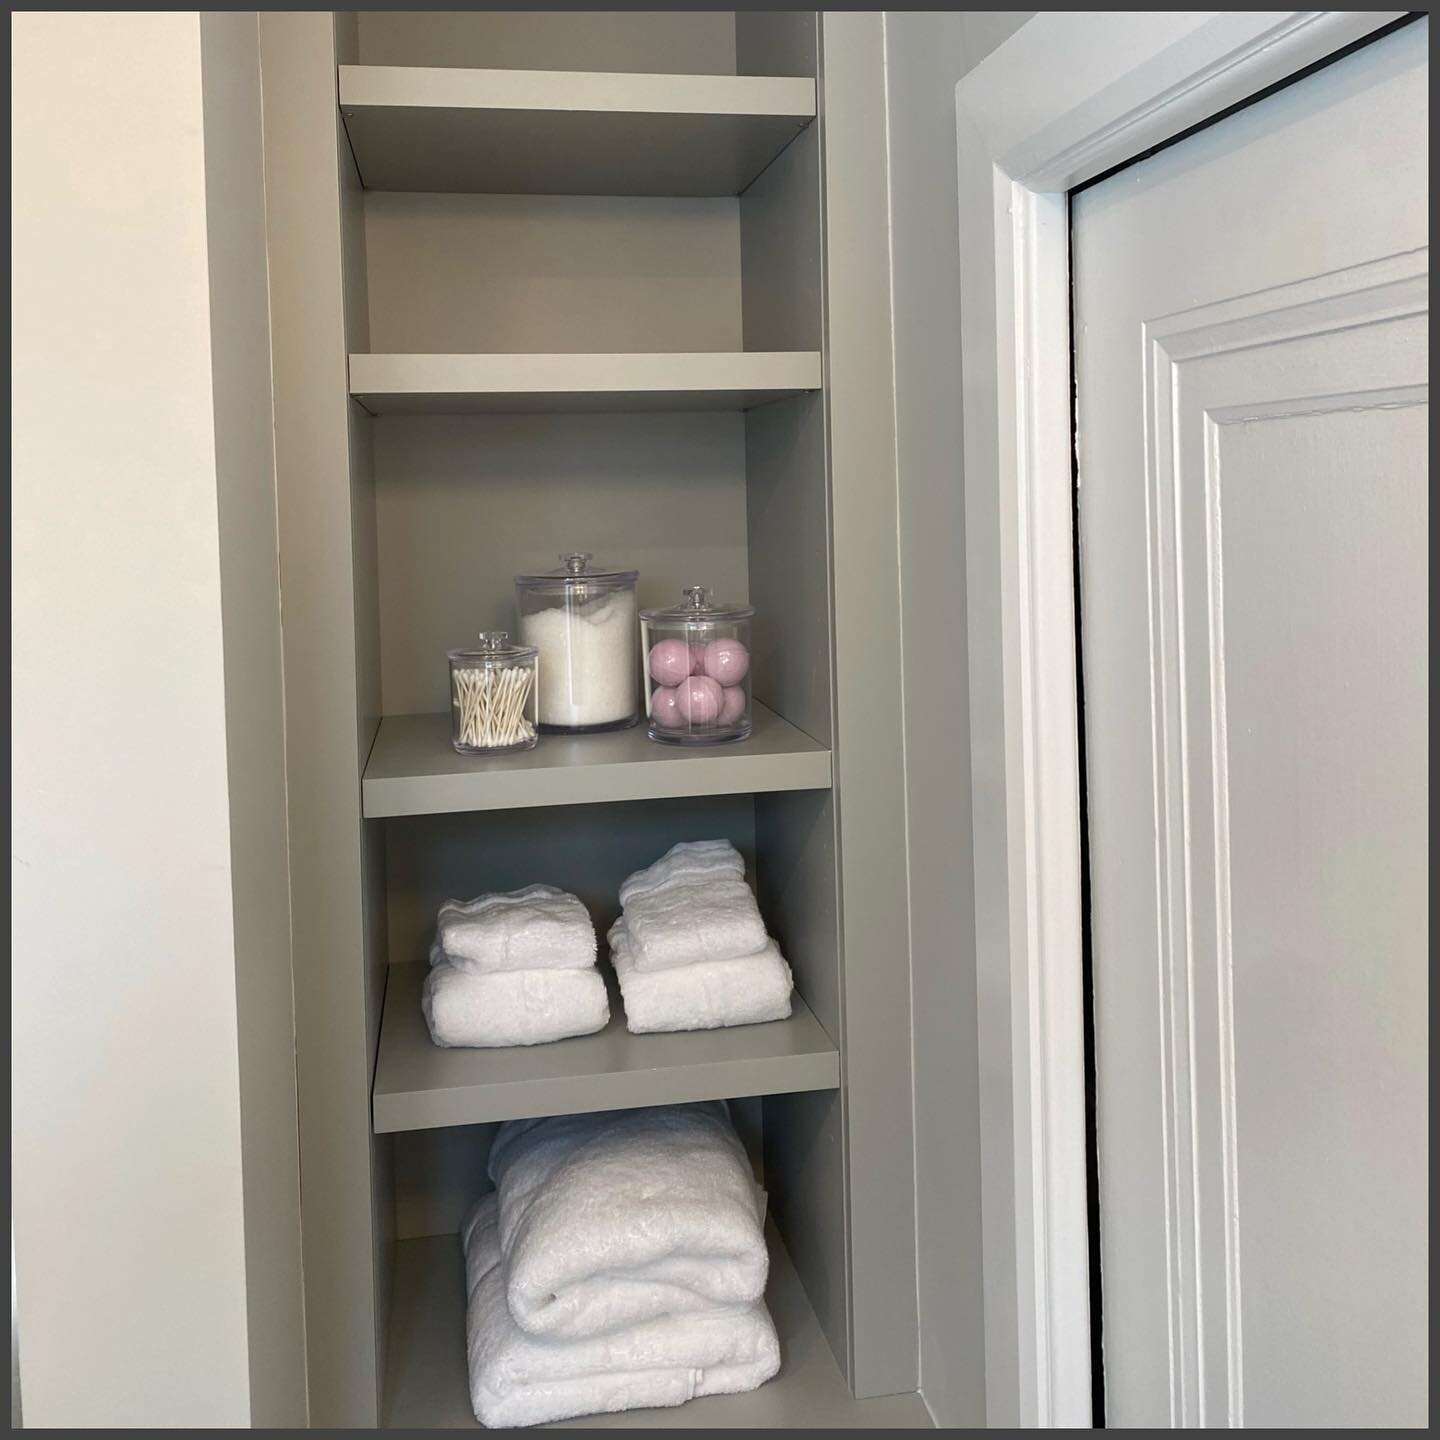 Sometimes you can find space to use where you least expect it. Here, we added the hall linen closet into the bathroom adding more useful interior space. @interiordesignbypaul finished it off with these custom built ins. We dig it, do you? 👇🏽👇🏽👇?